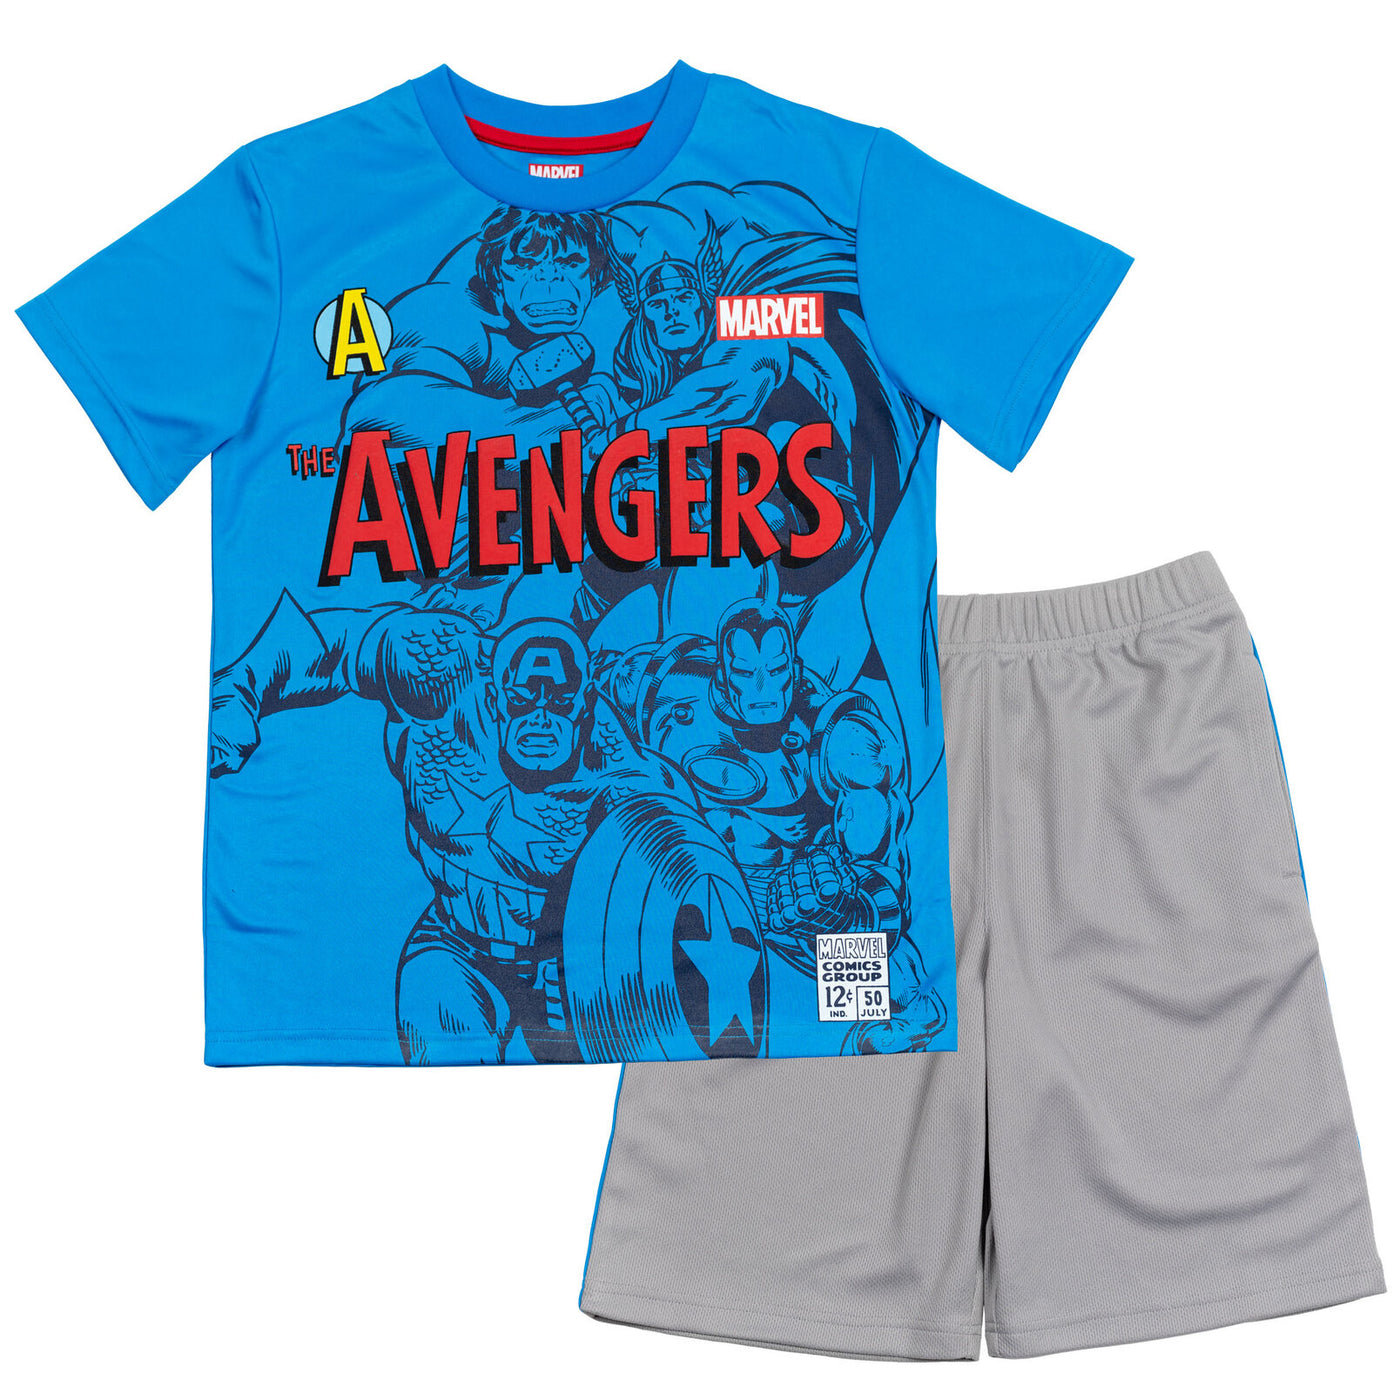 Marvel Avengers T-Shirt and Mesh Shorts Outfit Set